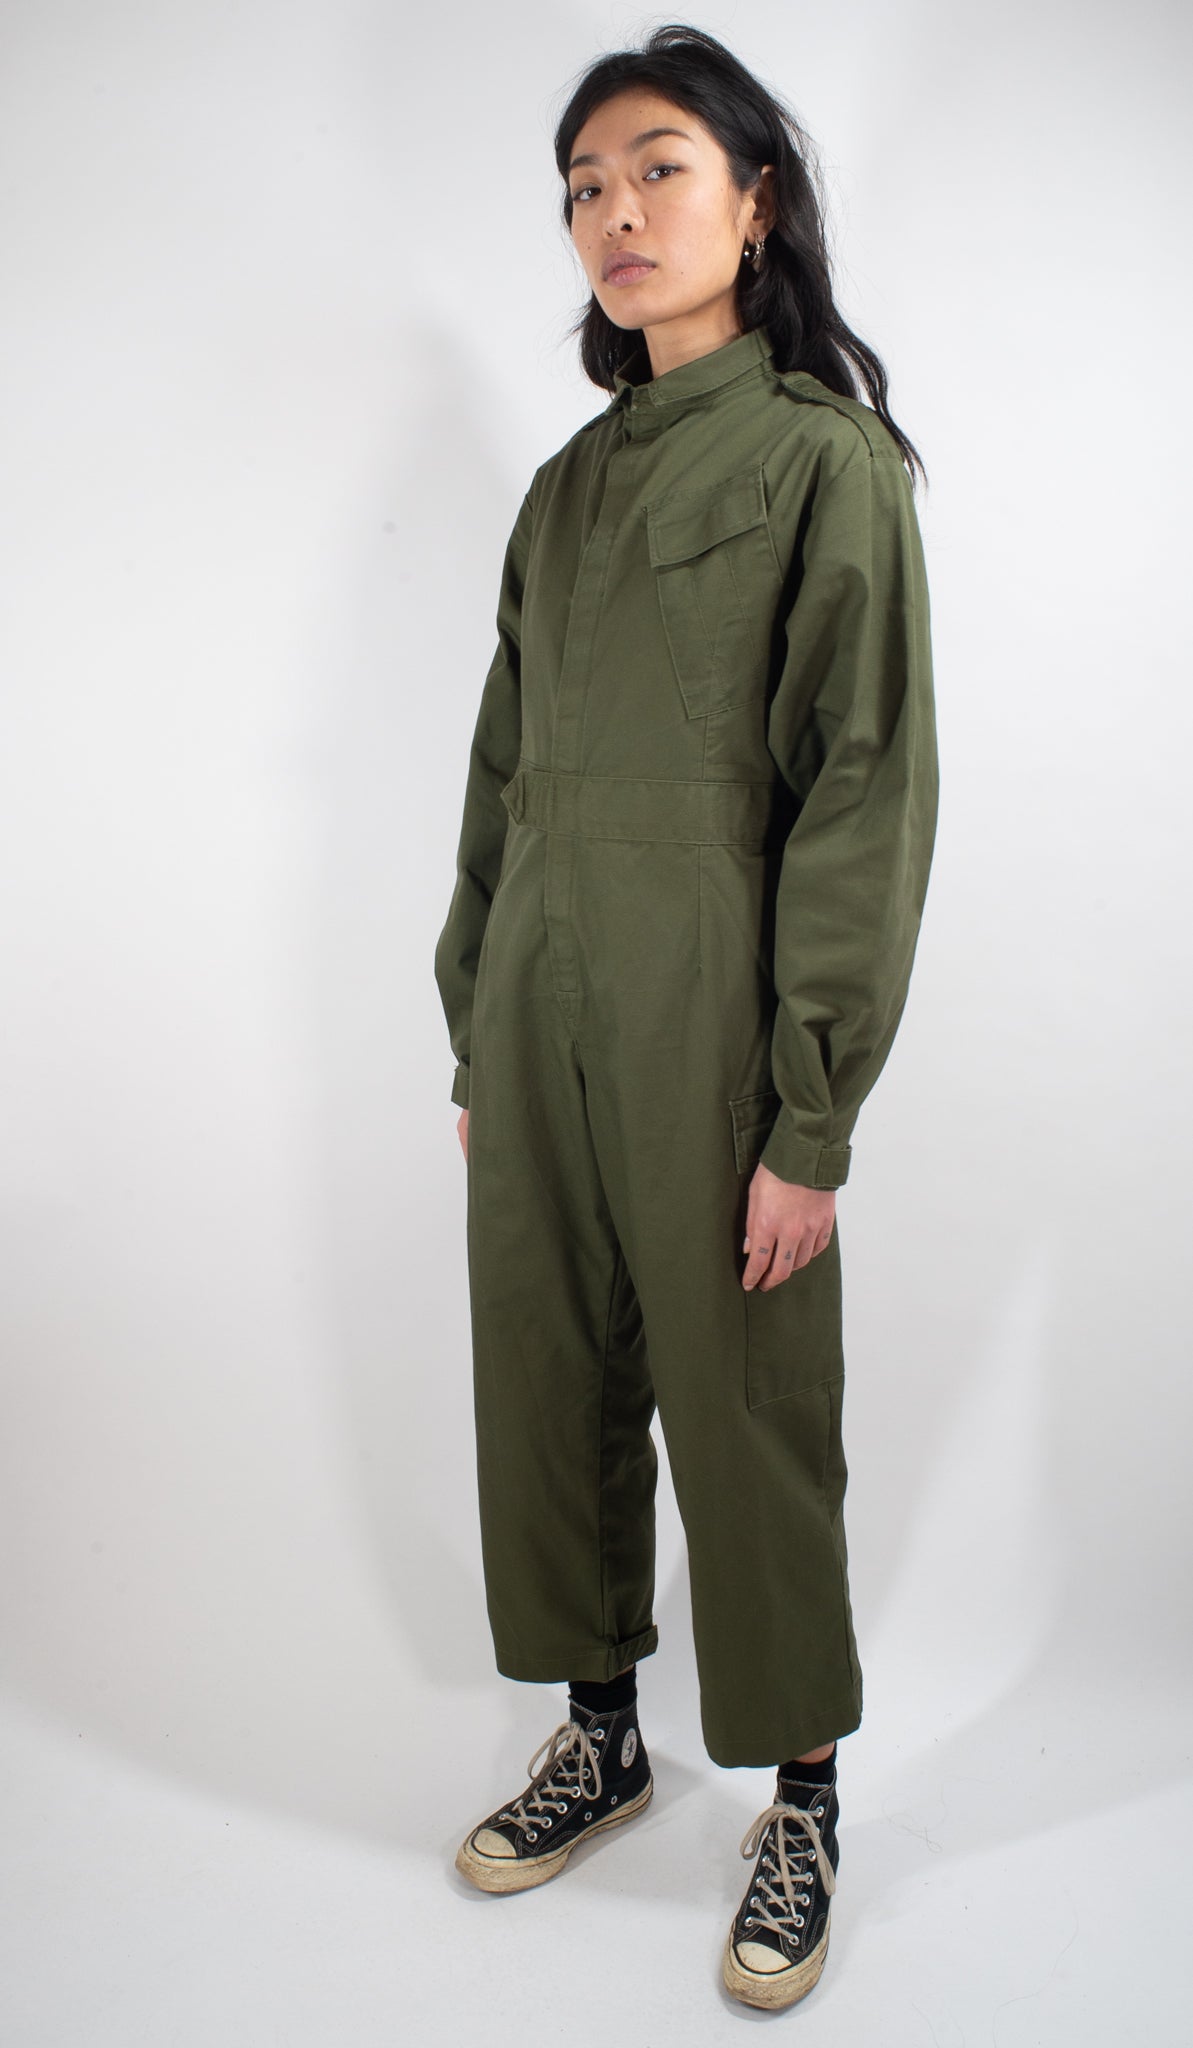 British Military Forces - Overalls - Various Colours - Grade 1